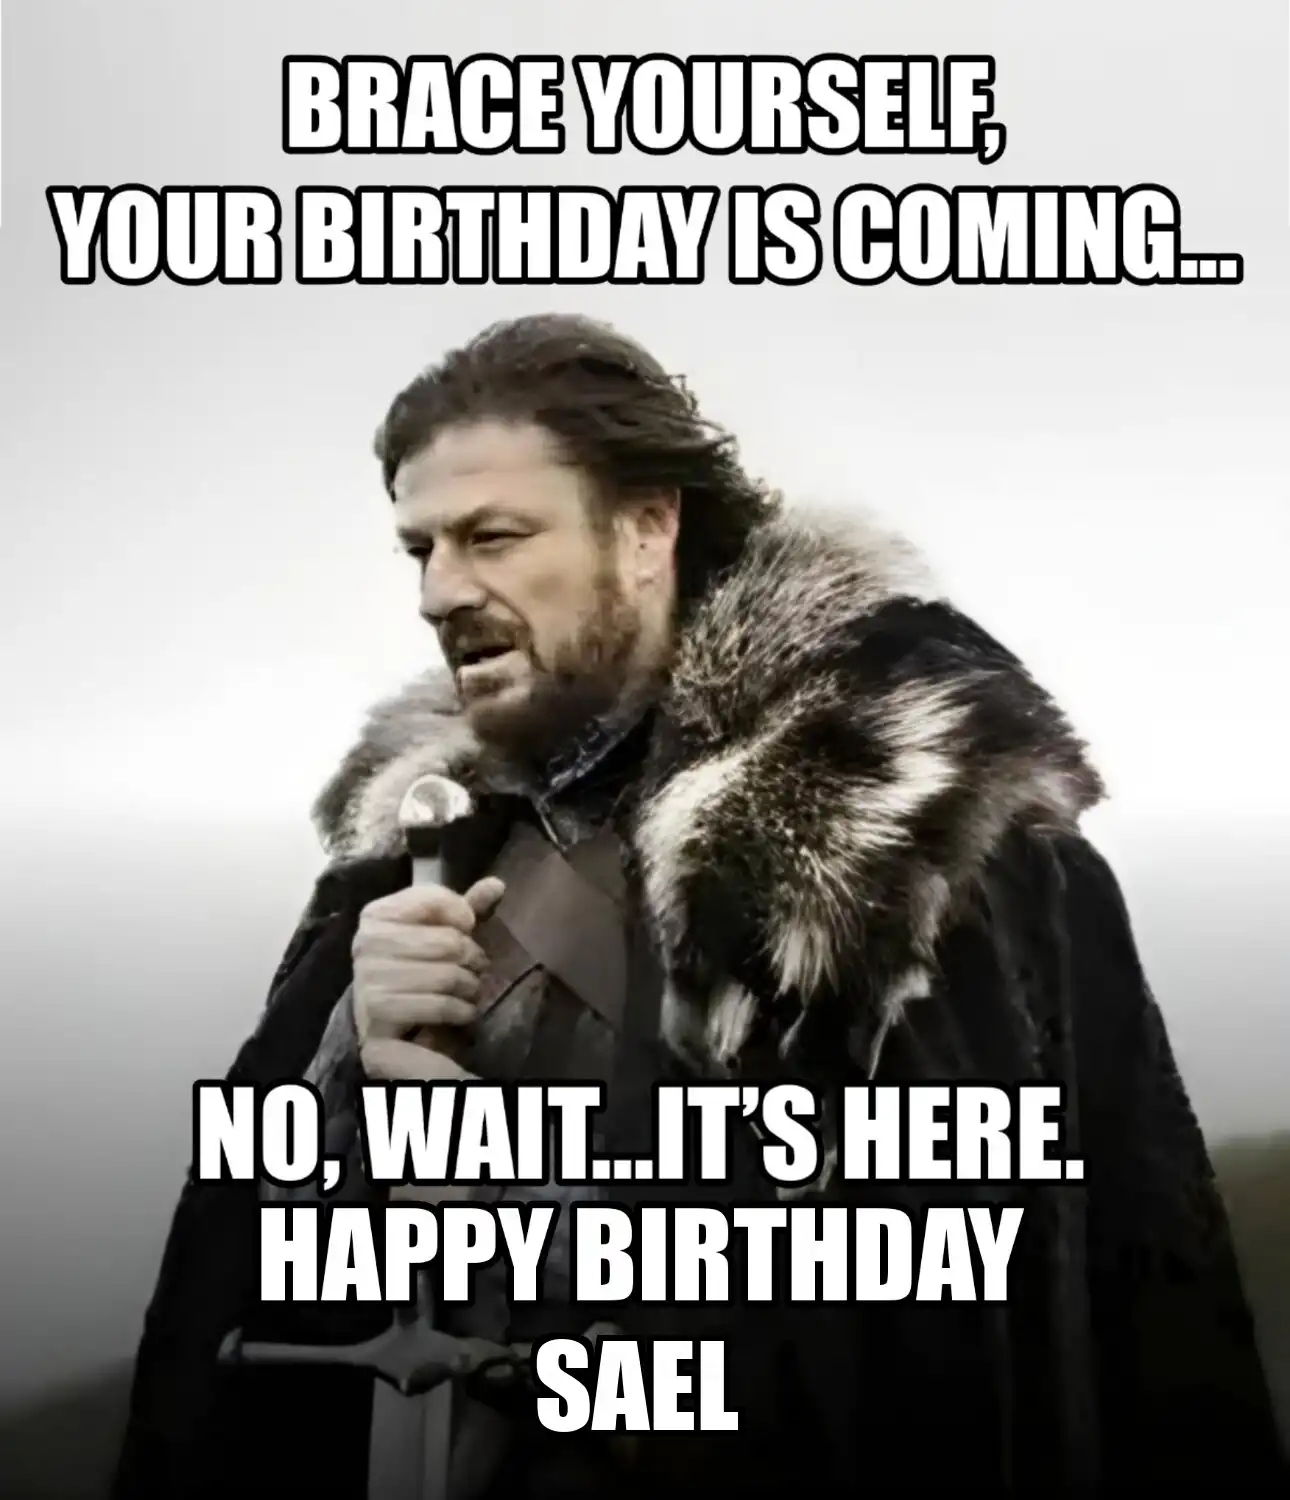 Happy Birthday Sael Brace Yourself Your Birthday Is Coming Meme